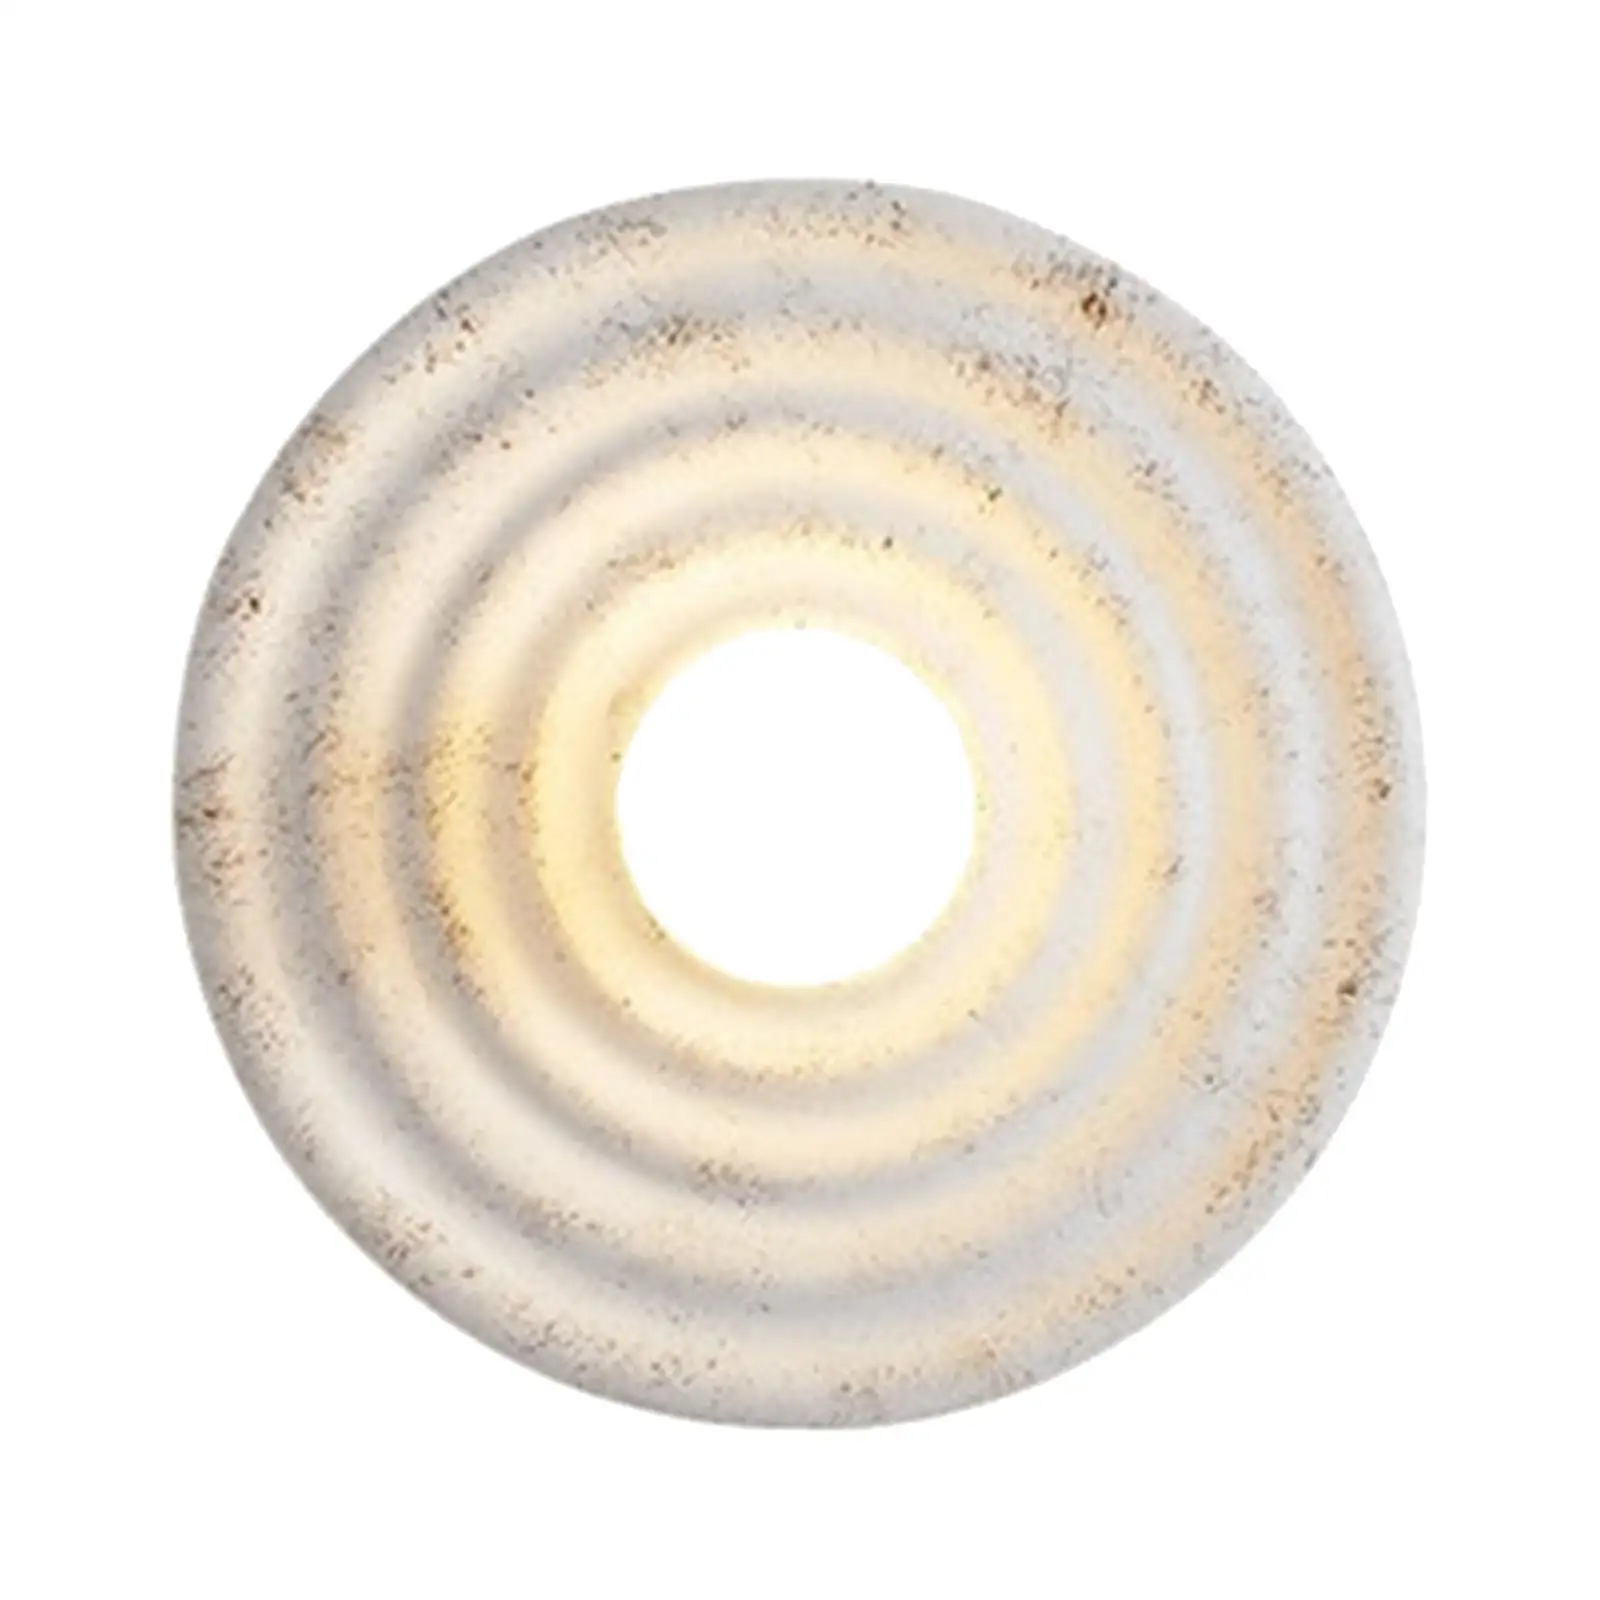 Round Wall Lamp Wall Lights Fixtures Wall Sconces Lighting for Kitchen Porch